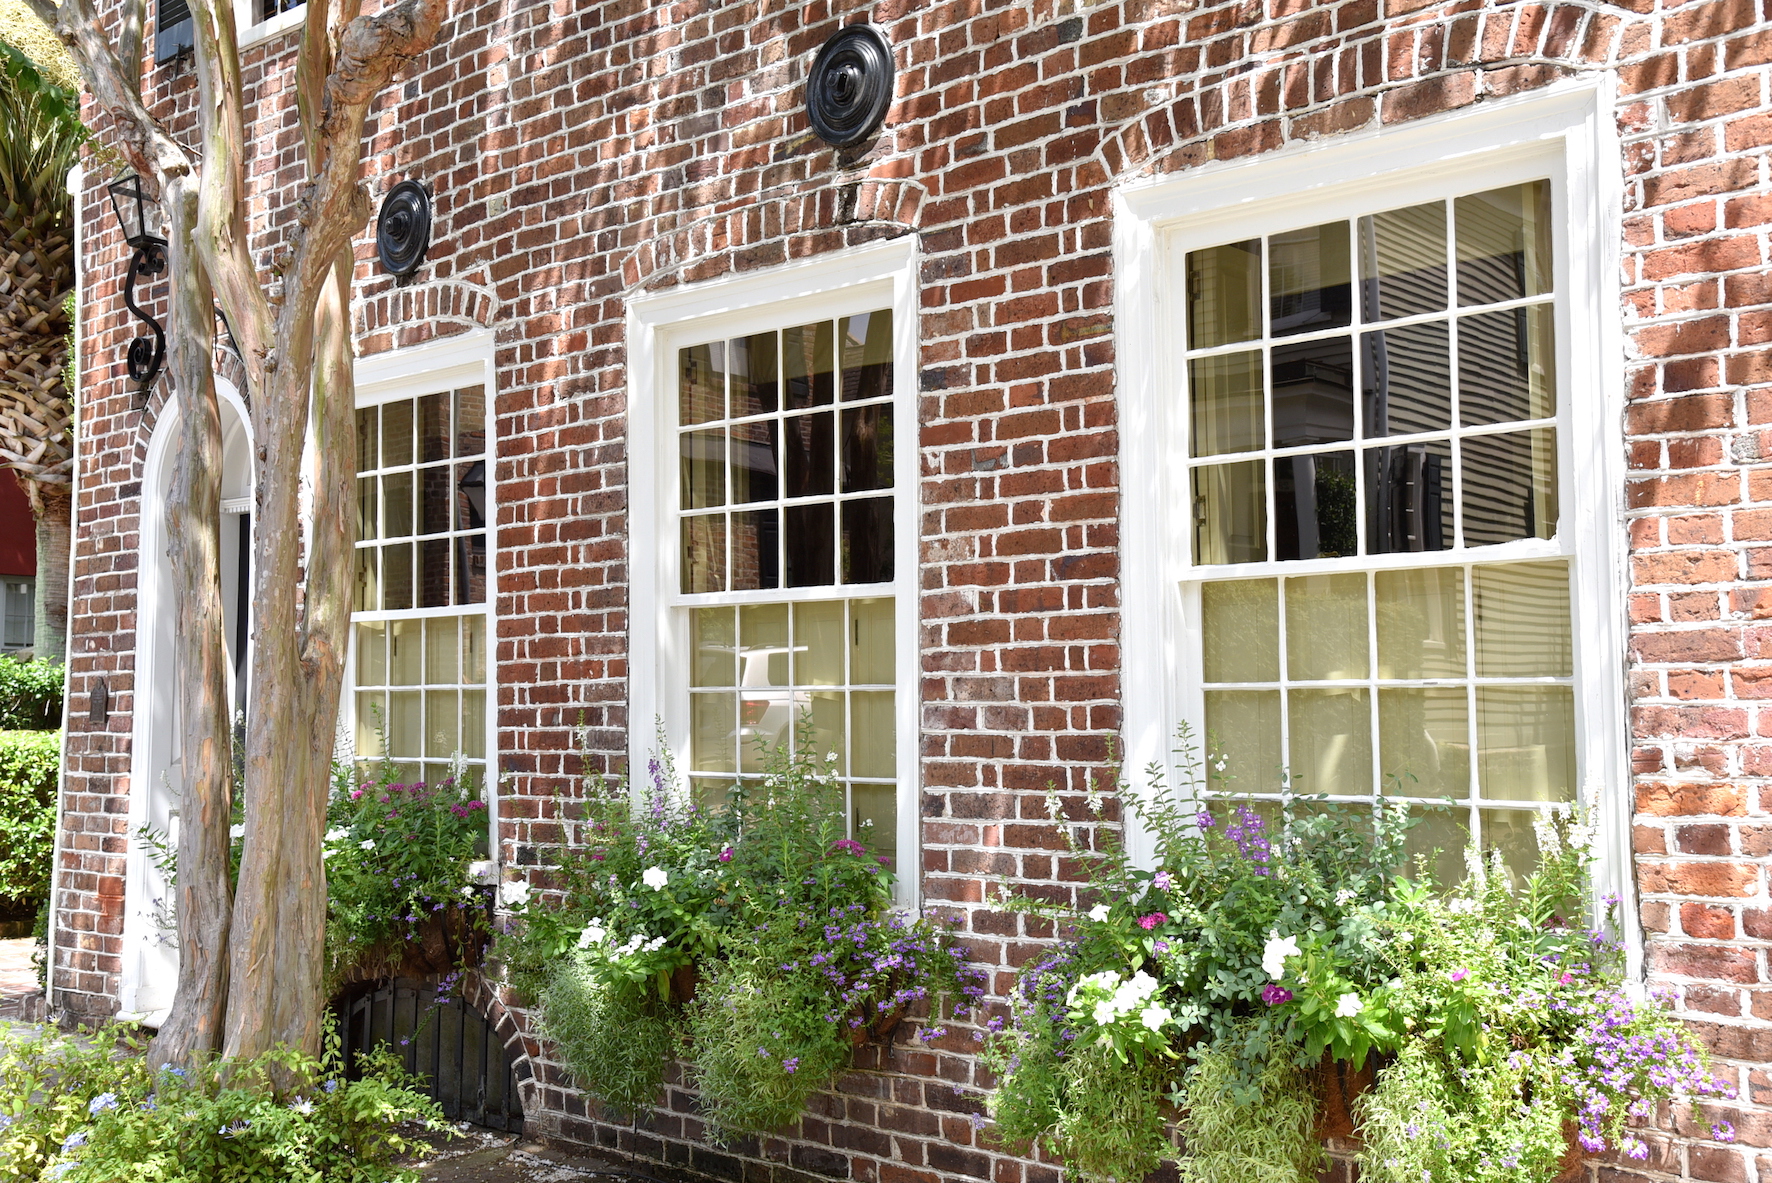 Southern Charm brick house style in Charleston